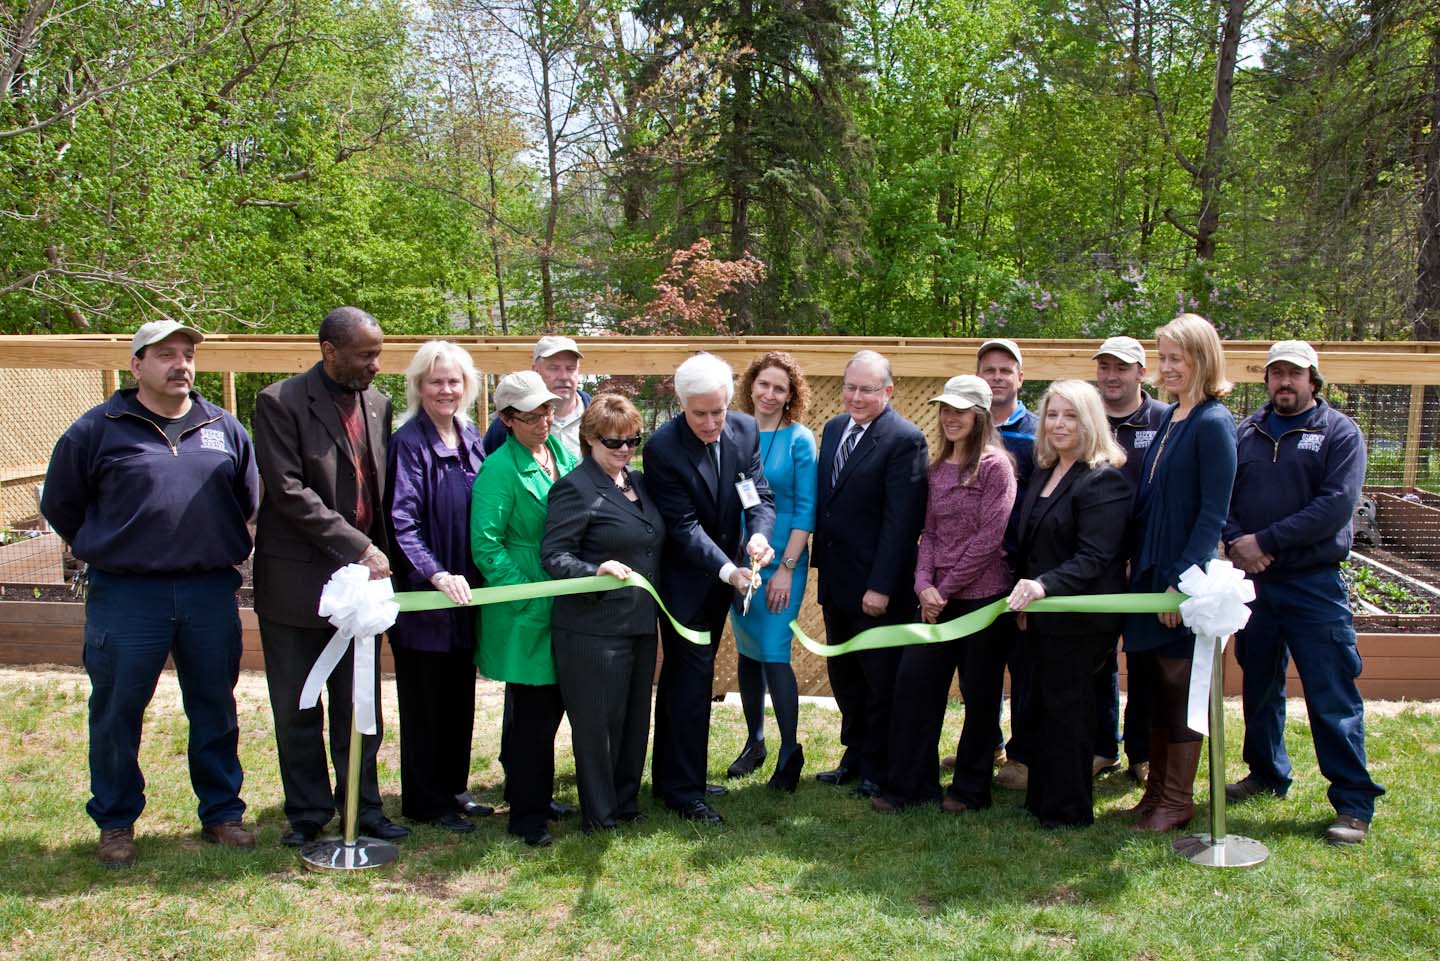 Hudson Valley Hospital President John Federspiel and Marisa Weiss, president and founder of Breastcancer.org, (center) dedicate new Organic Garden for Healing at Hudson Valley Hospital Center surrounded by garden volunteers, employees and donors who made the garden possible.